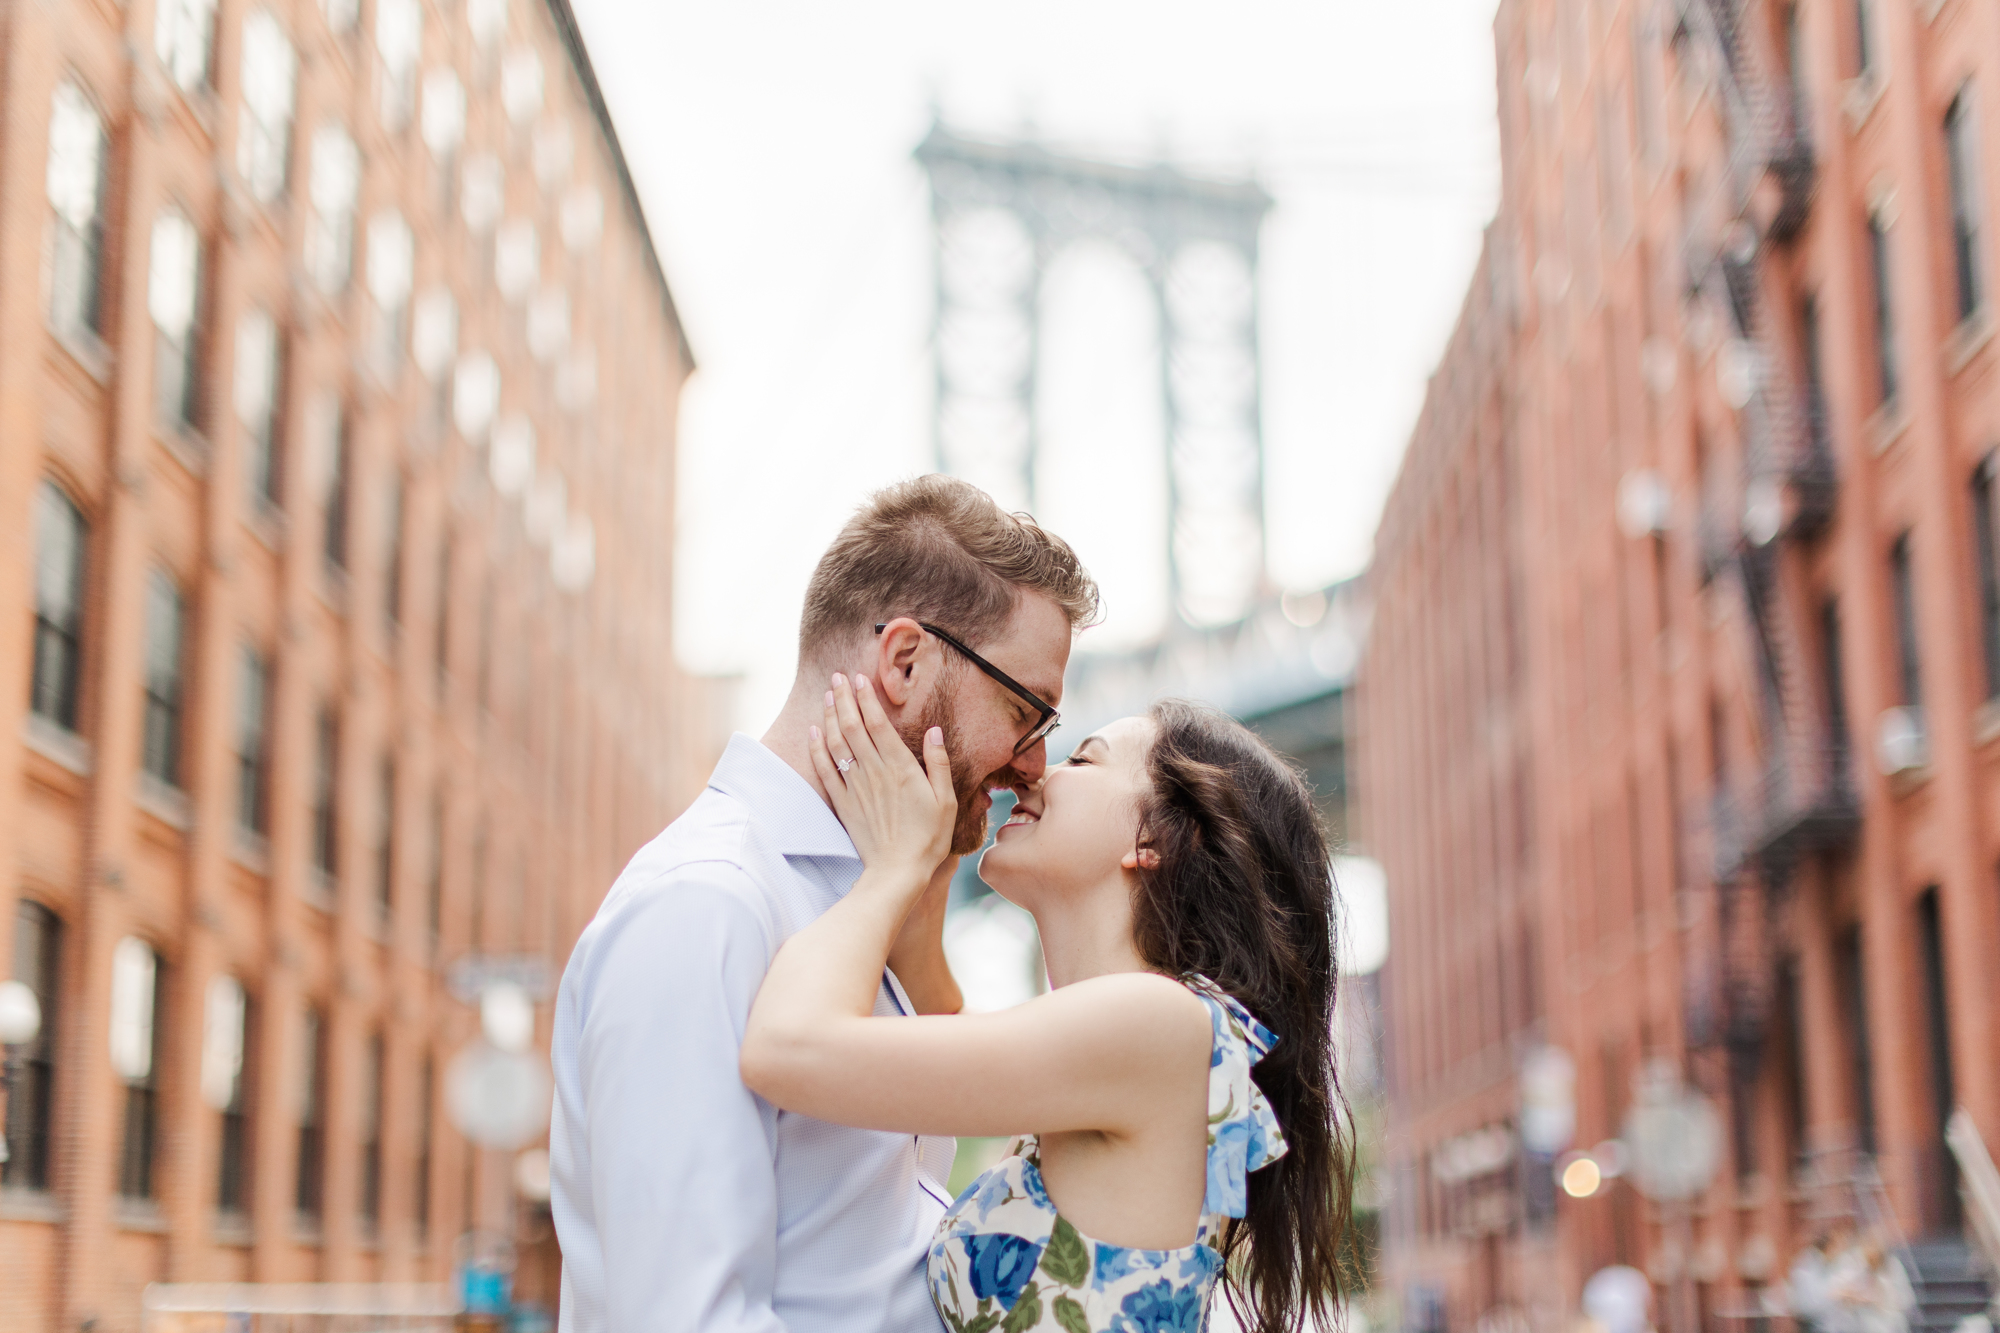 Playful Engagement Photos in Brooklyn Heights